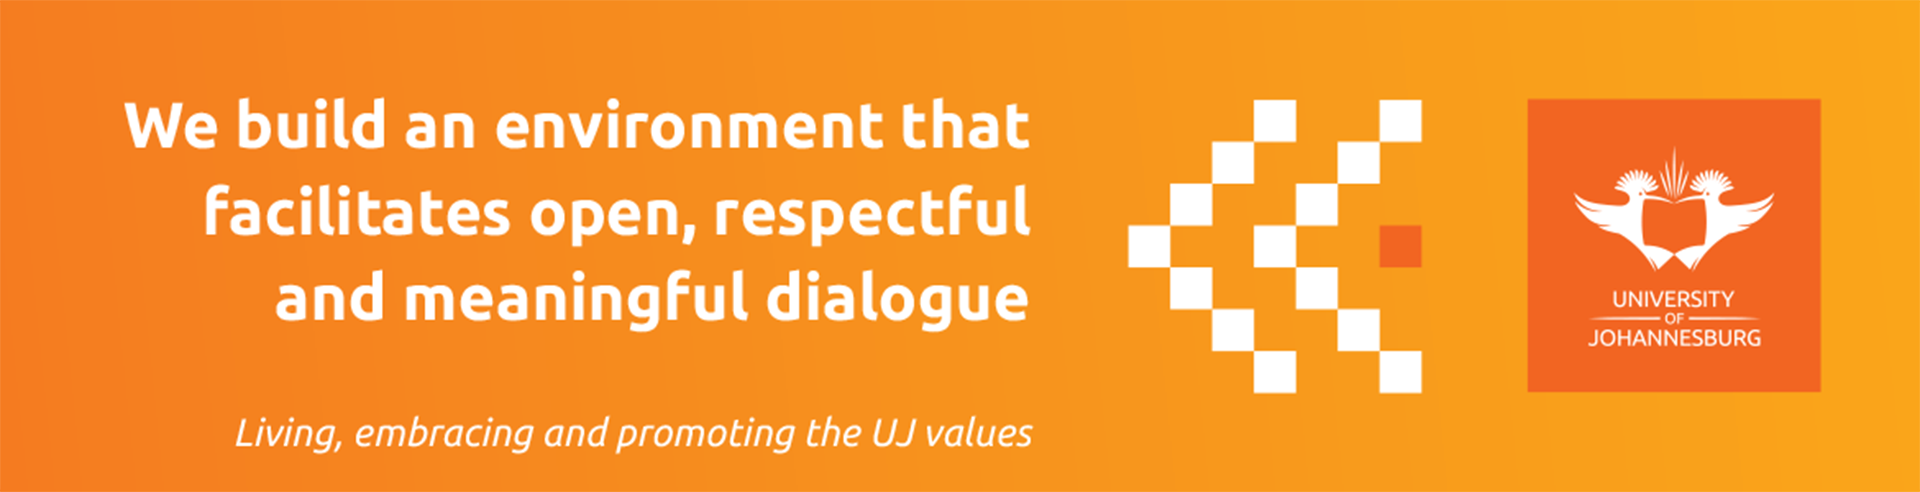 Uj Values Expressions Posters 2020 Ulink 1170x300mm 16